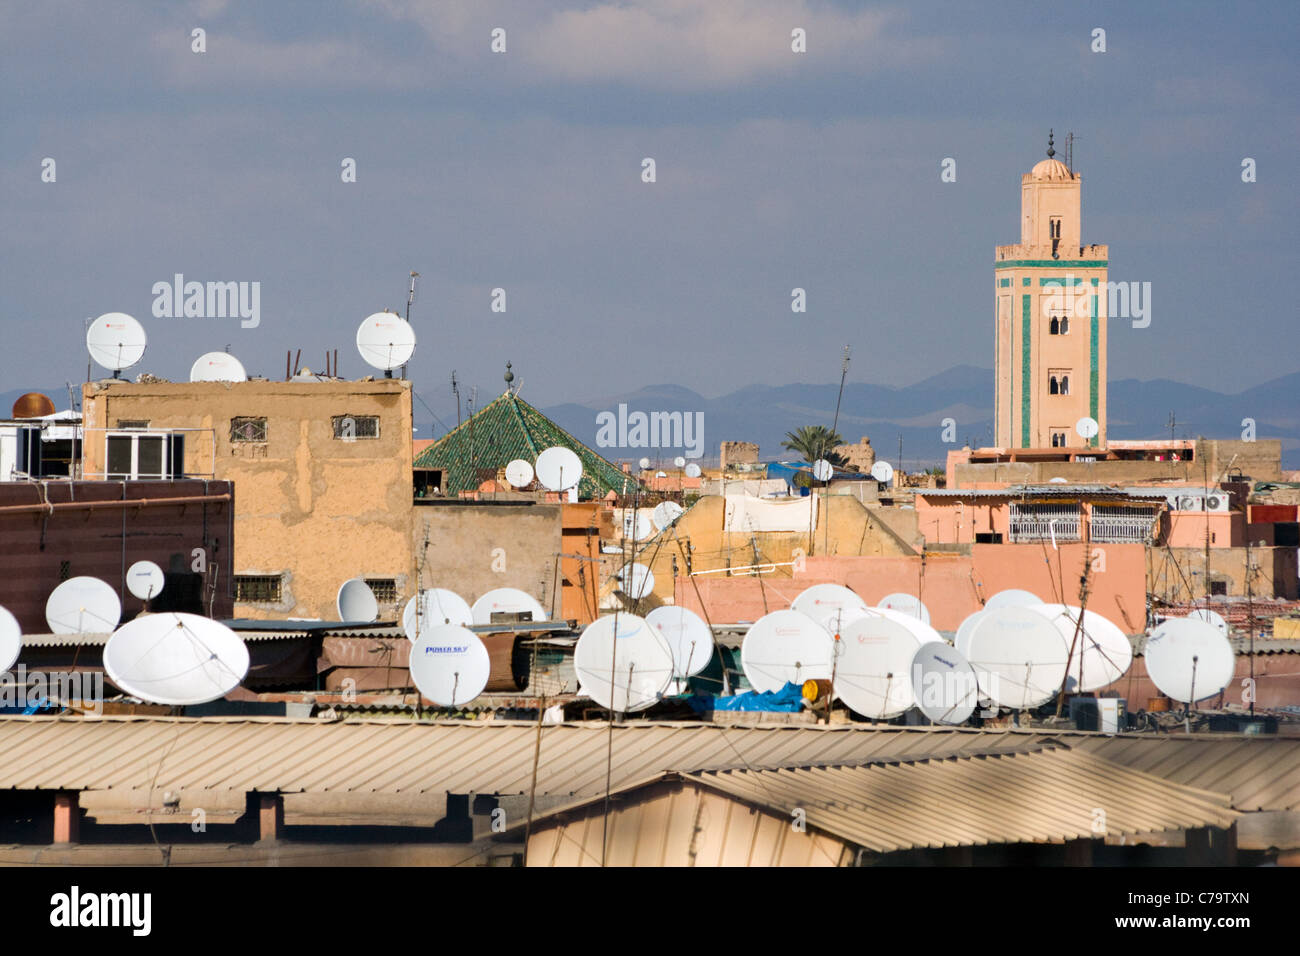 Satellite dishes on the roof of the old city center from Marrakesh, Morocco Stock Photo